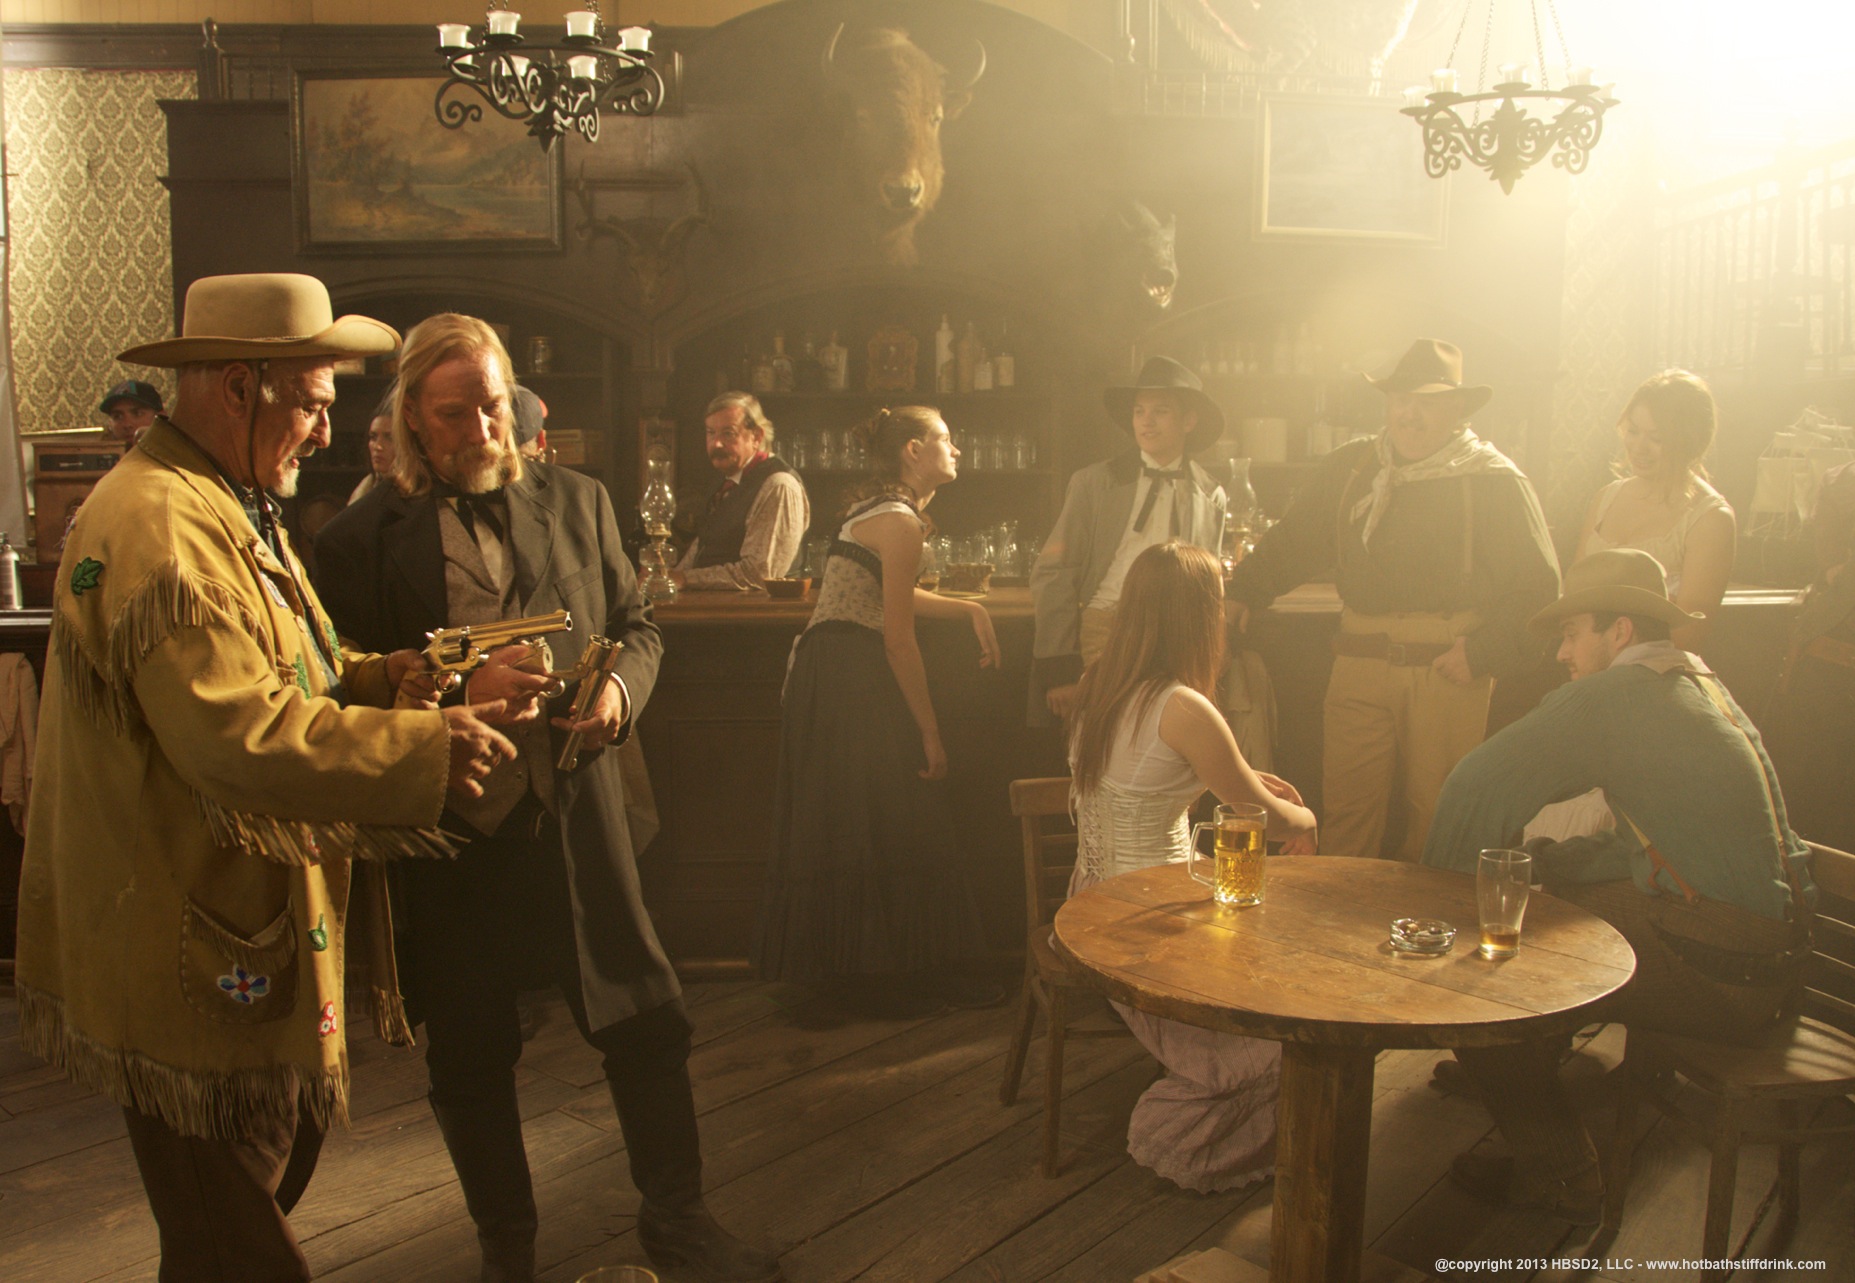 Jeffery Patterson and Peter Sherayko review weapons in the Saloon